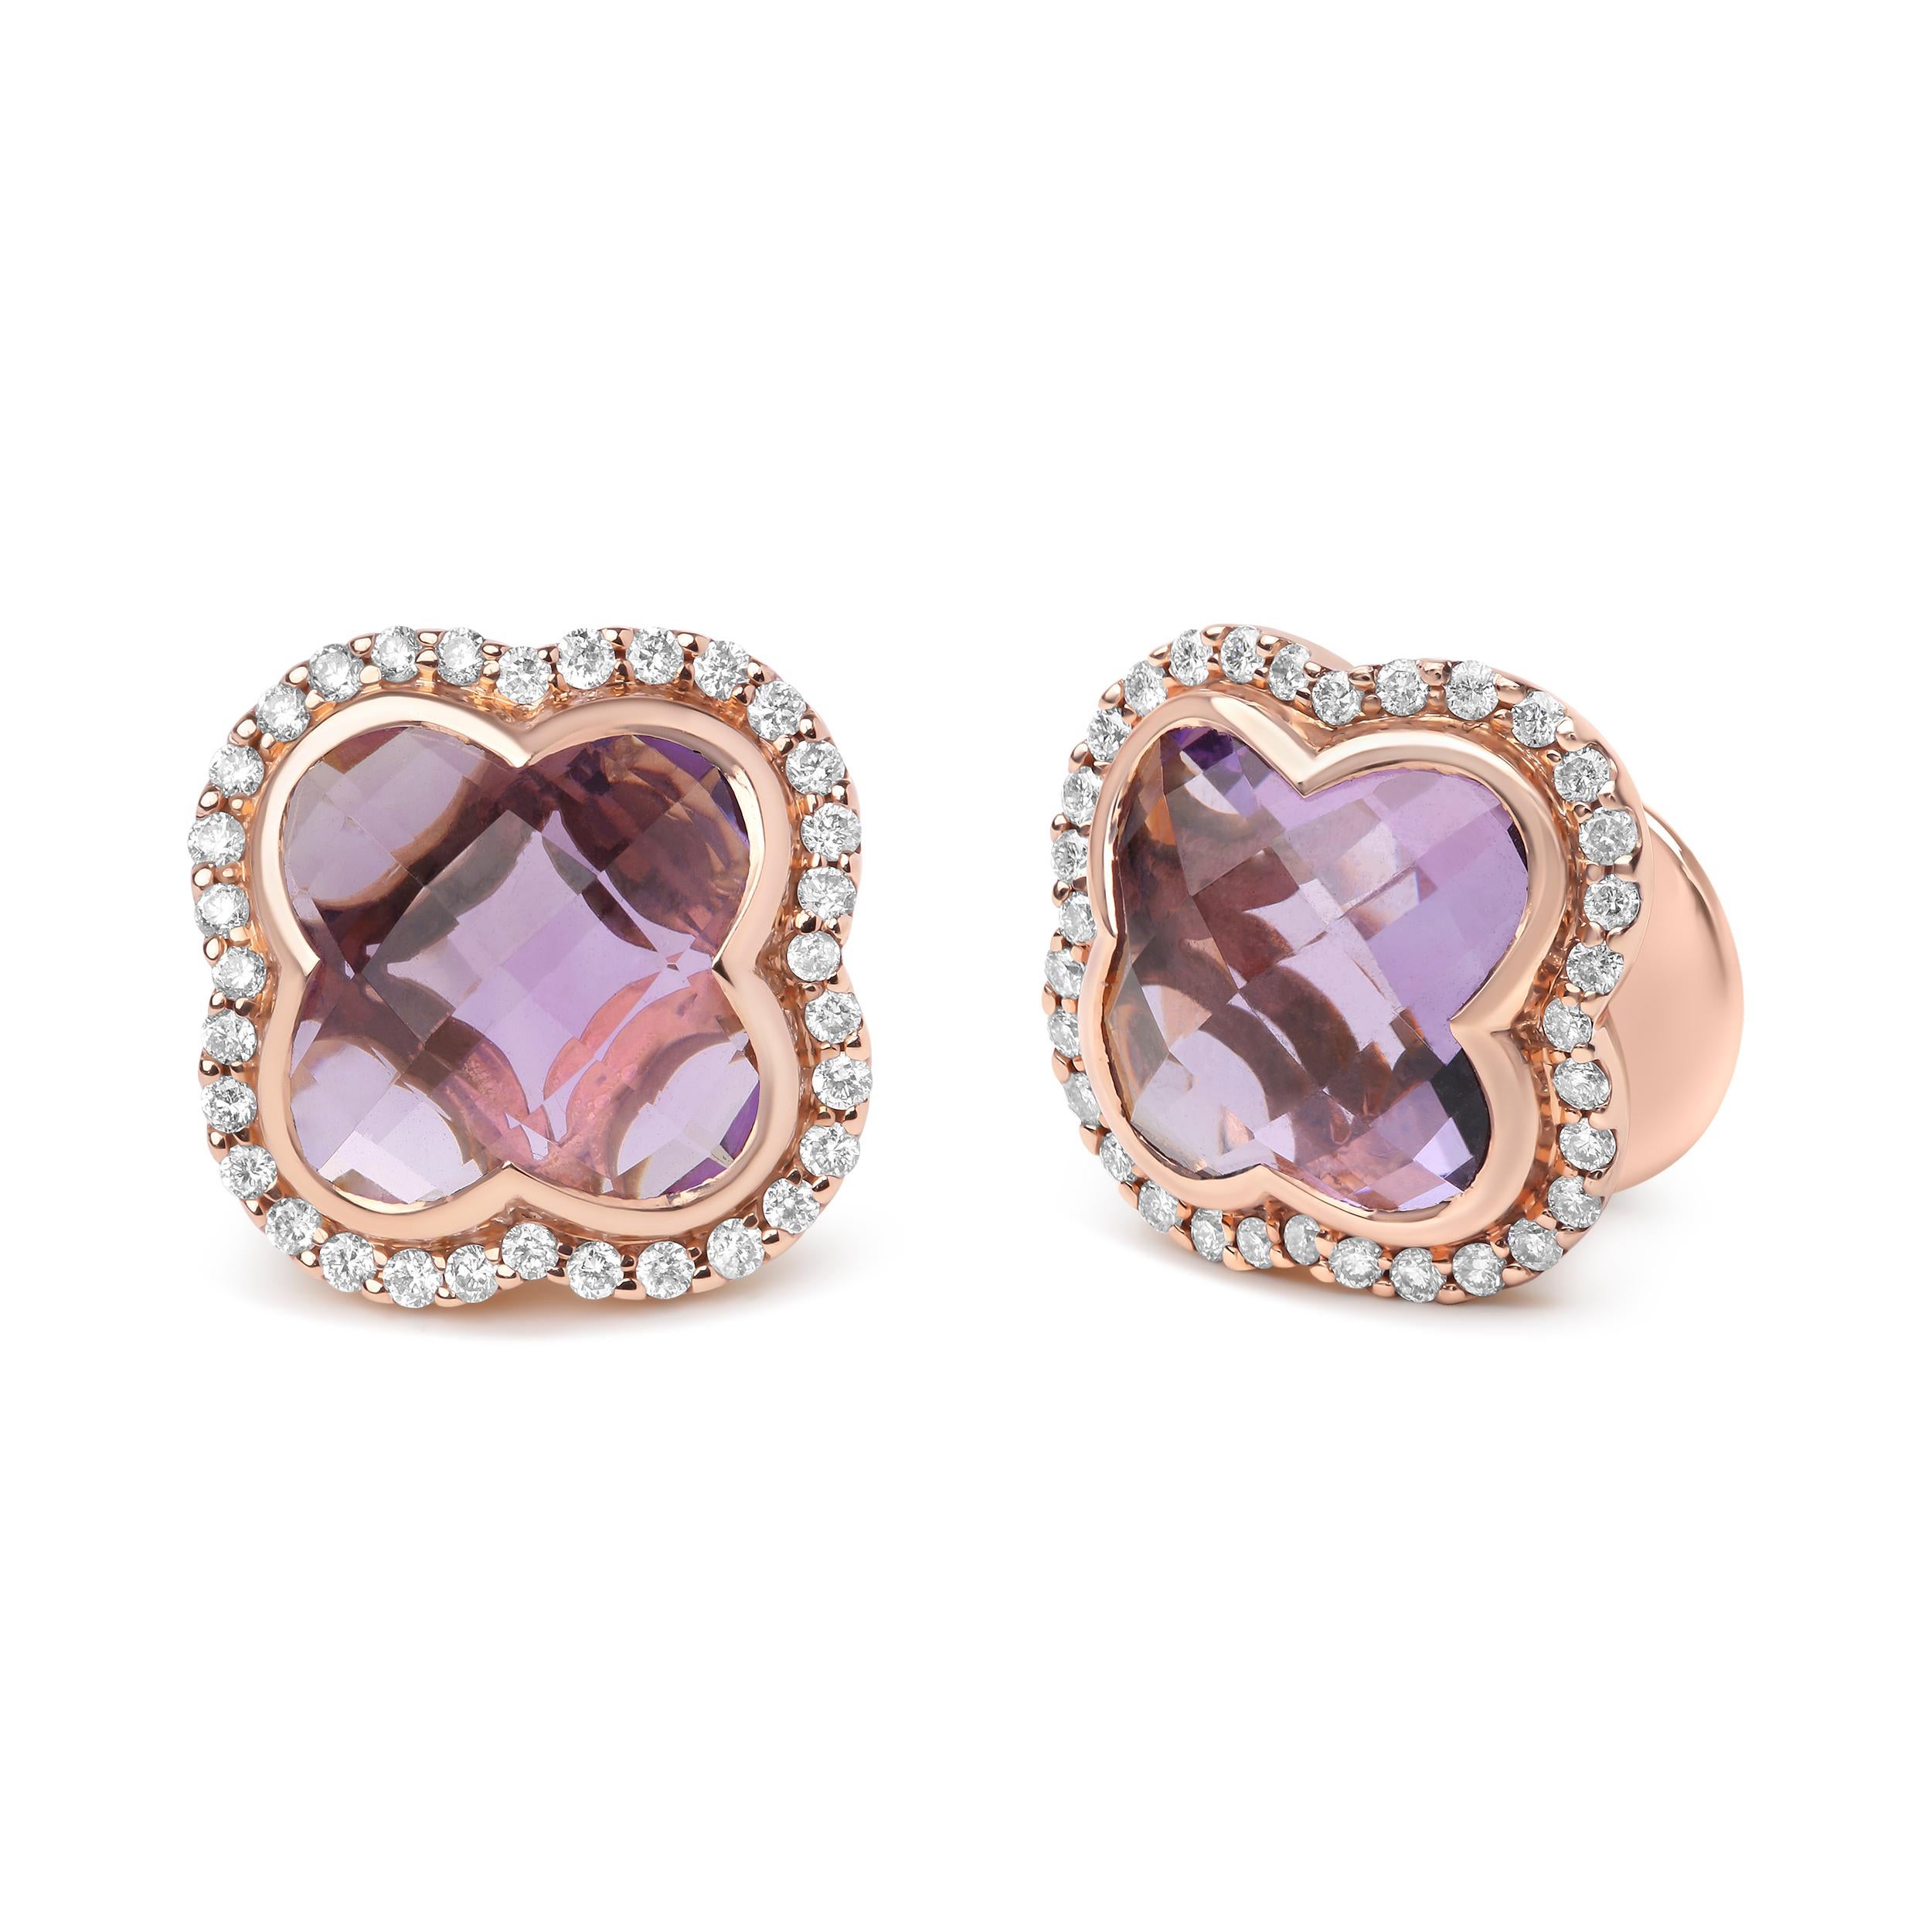 Wear your luck whenever you slip on these gorgeous 18k rose gold stud earrings. These earrings bring you good fortune in the shape of natural 11x11mm clover-cut heat-treated purple amethyst gemstones in an invisible setting which serves to amplify